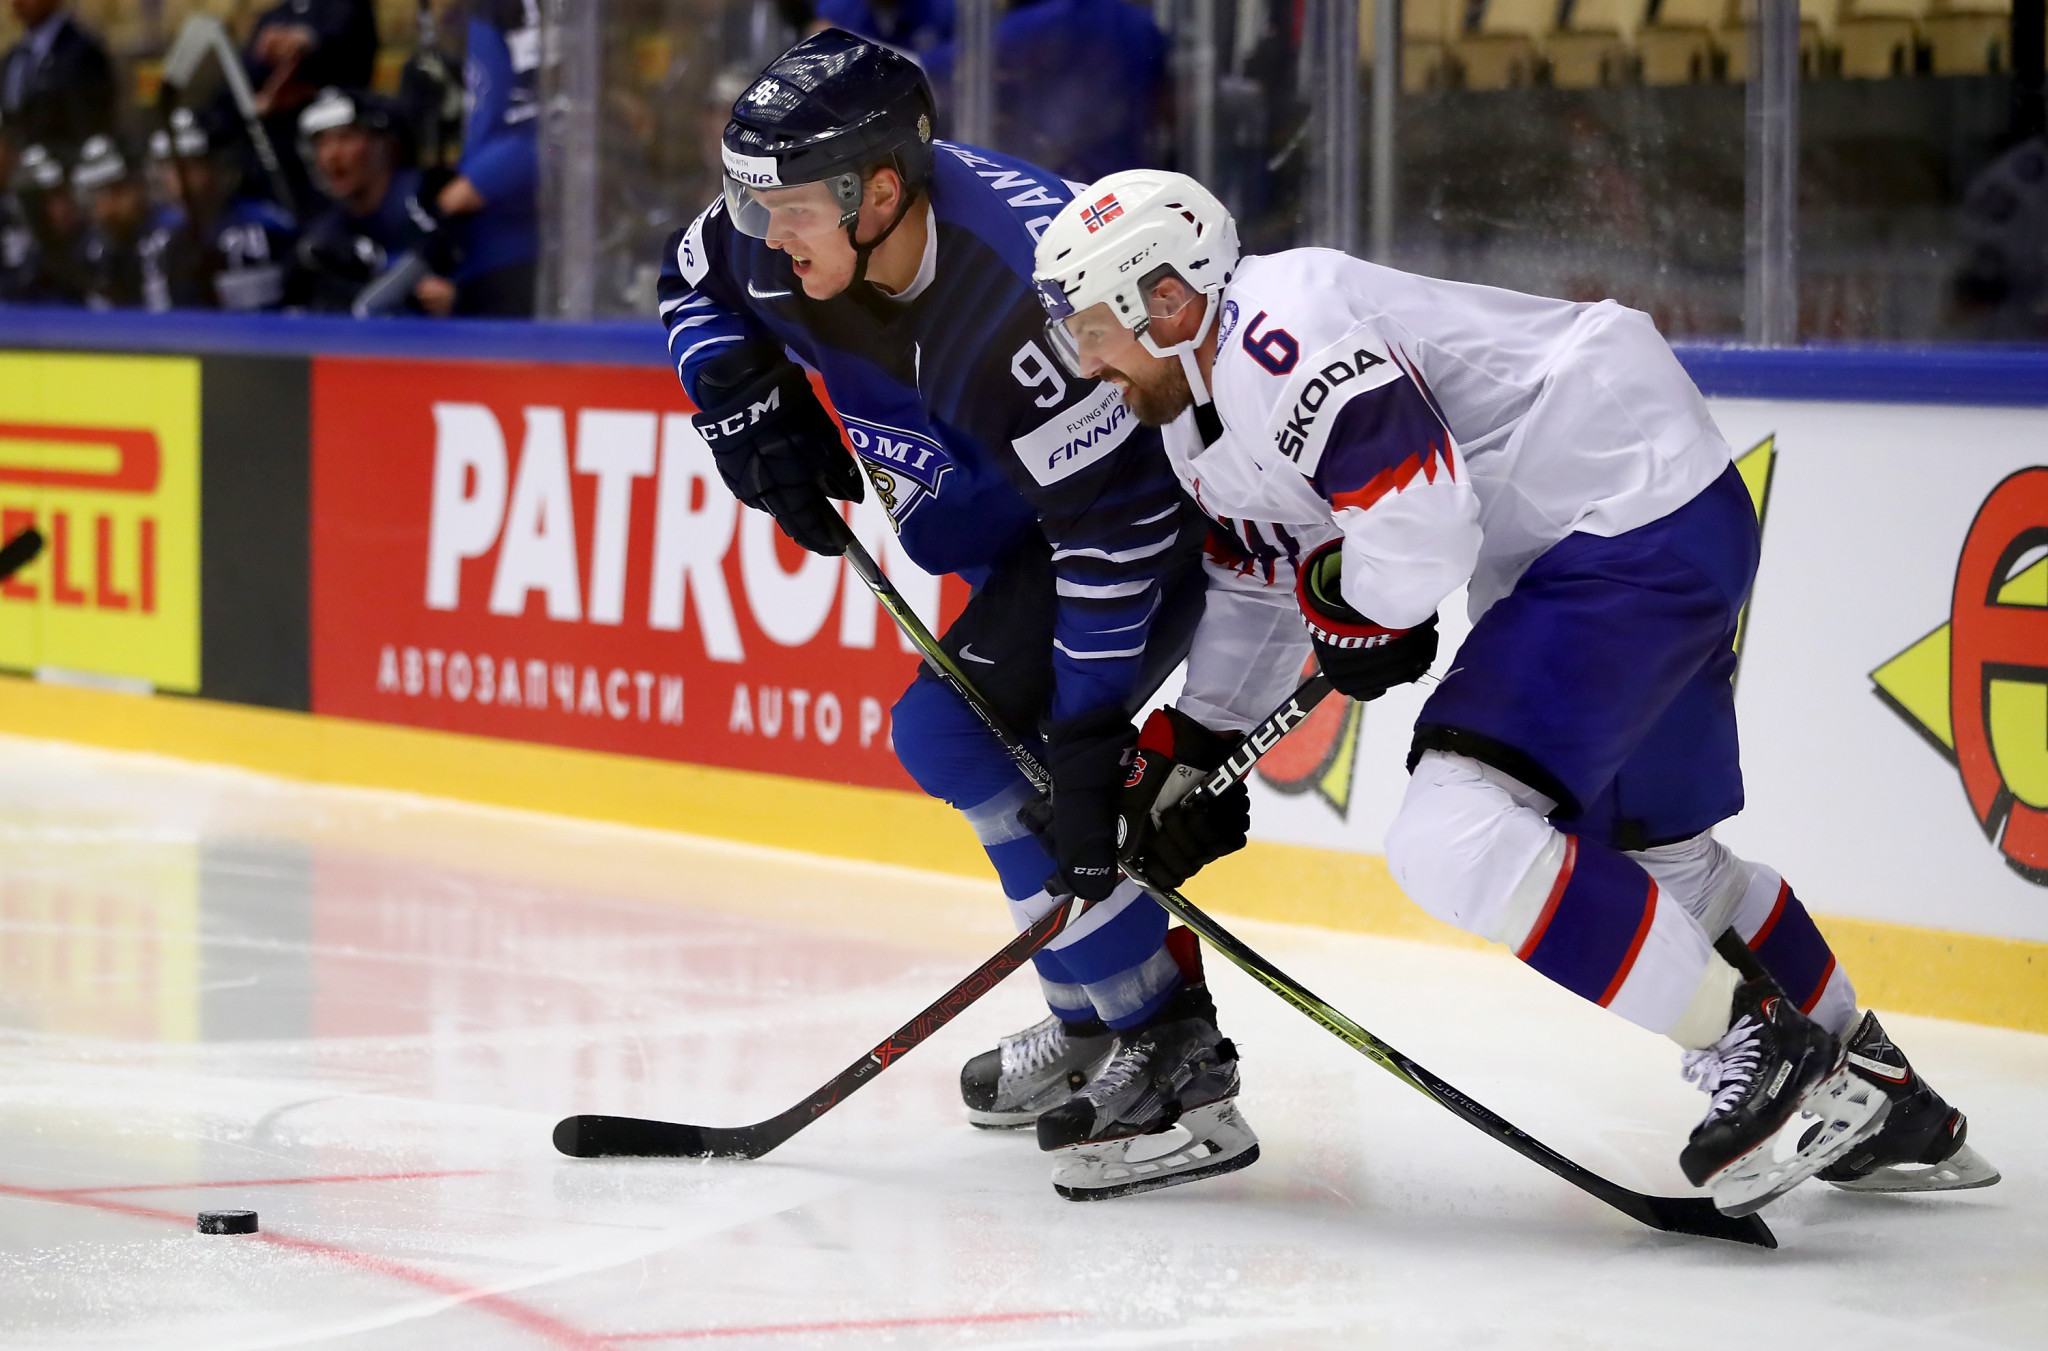 Finland recorded a comfortable 7-0 victory over Norway to move to the top of Group B ©Getty Images